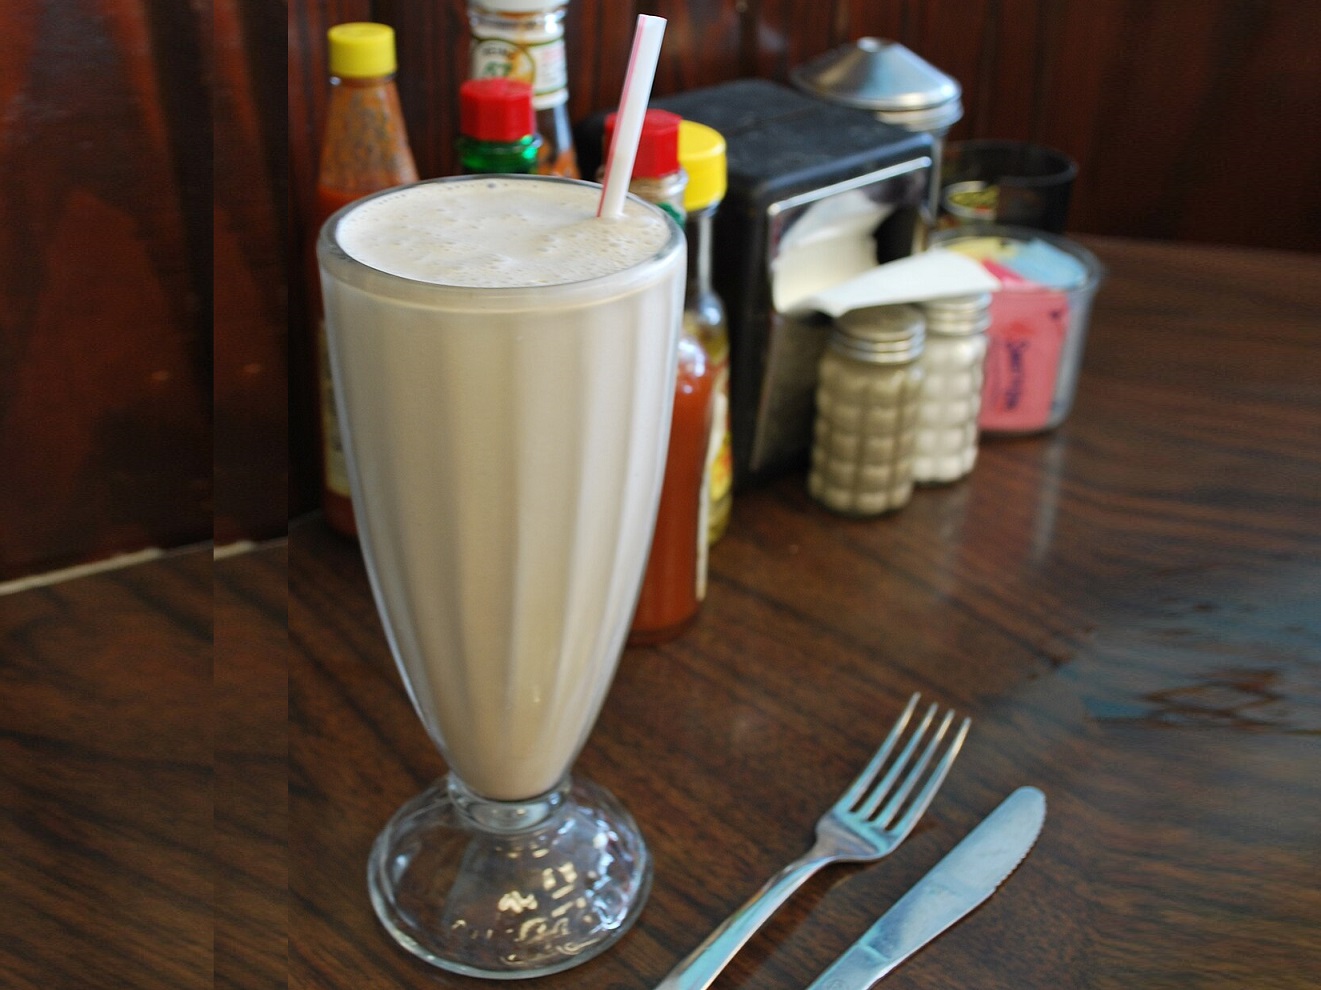 <p>The PB&J Milkshake is one of the most beloved items on Disney's menus, but did you know you can order it spiked at well? Well, now you know!</p>